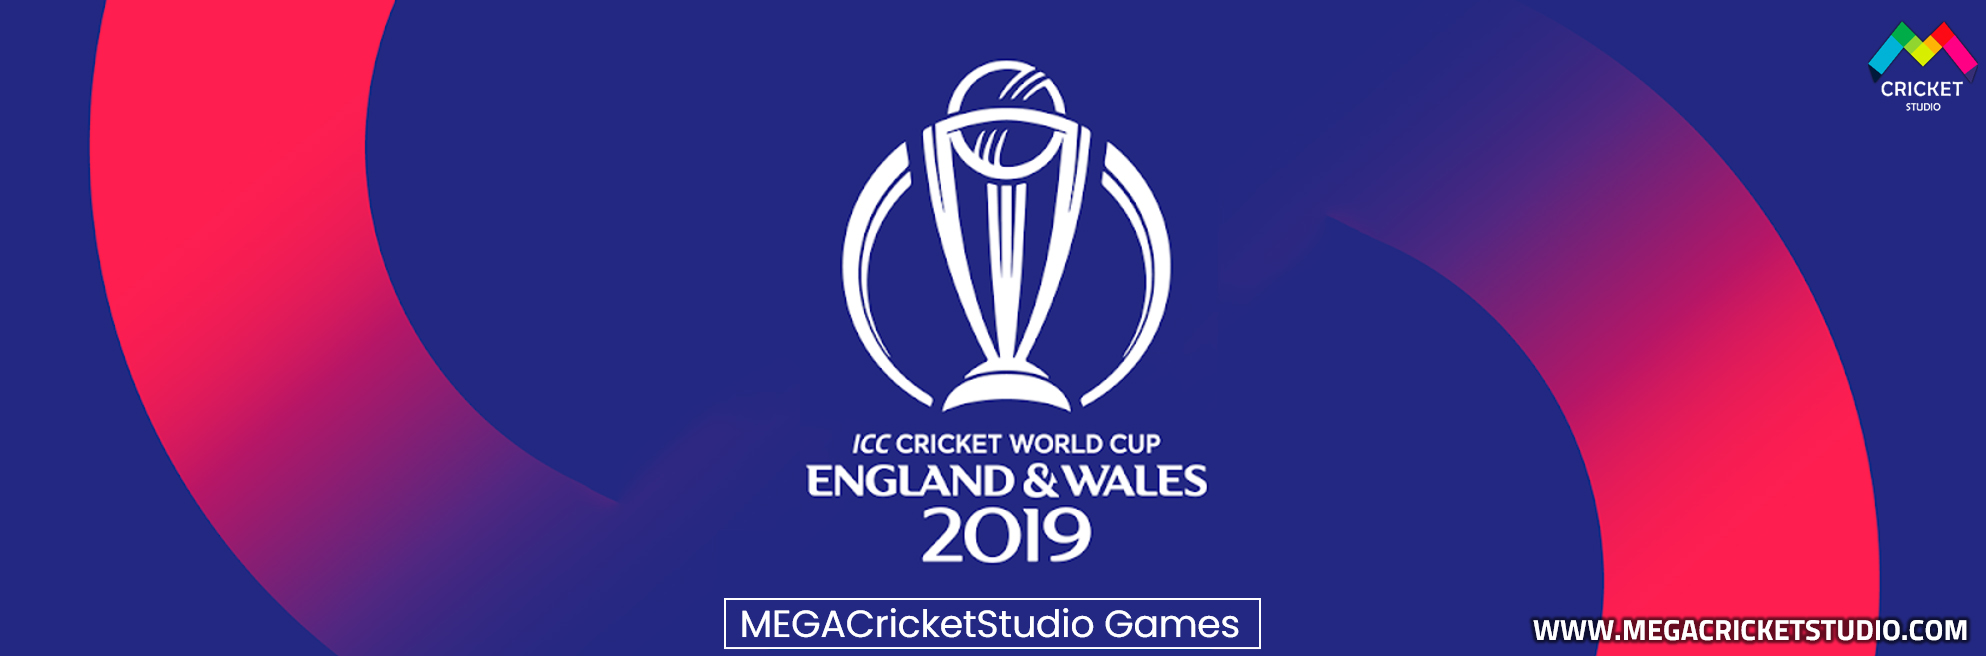 A2 Studios ICC Cricket World Cup 2019 Patch for EA Cricket 07